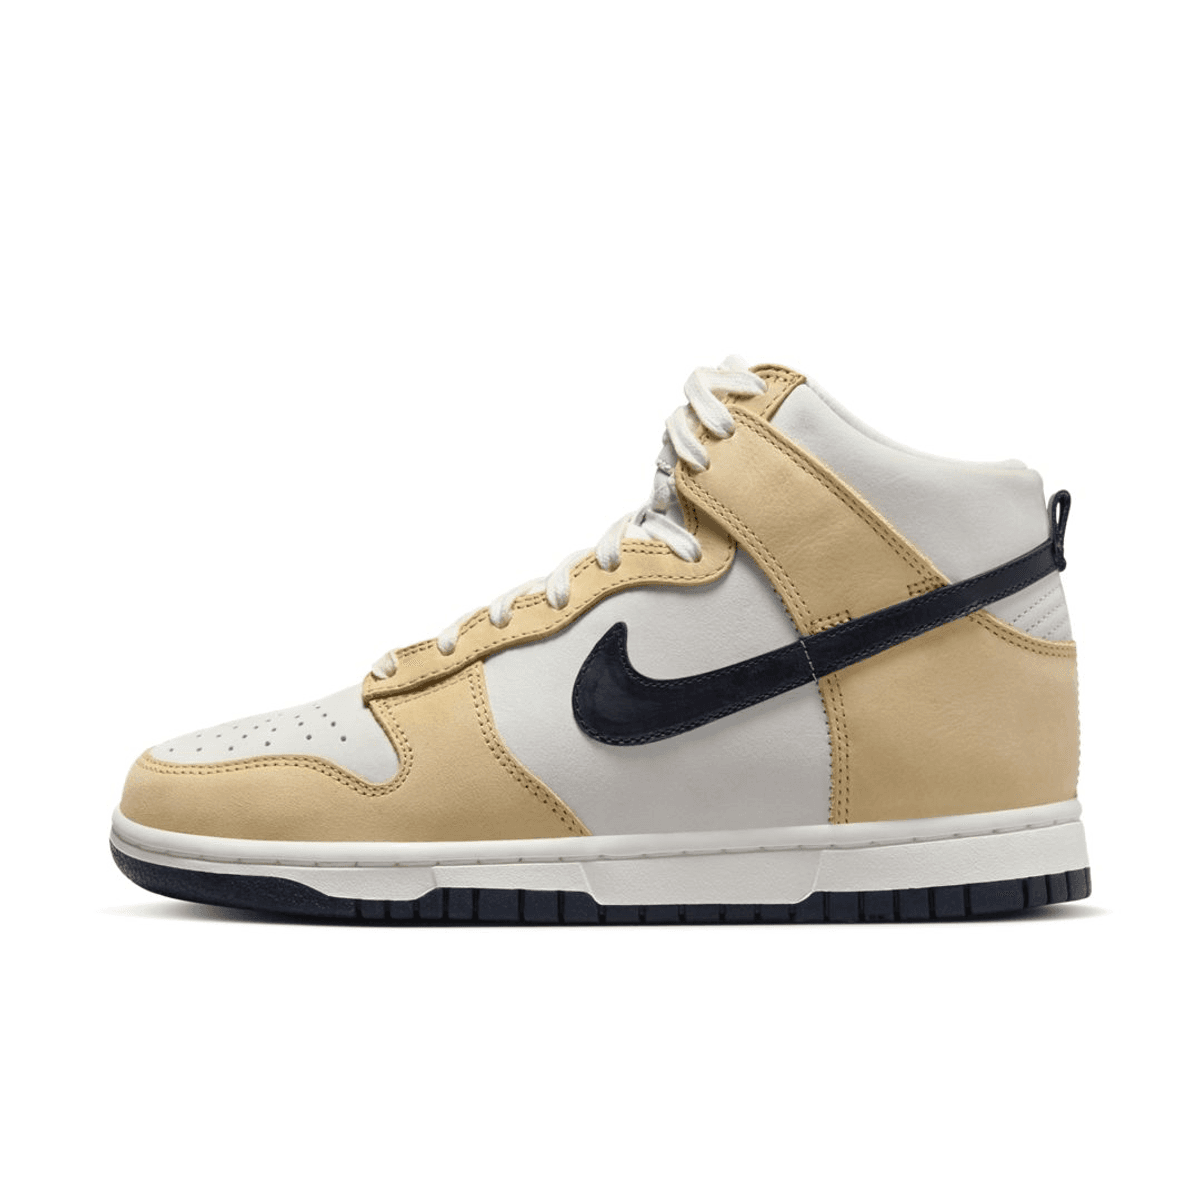 Official Images Of The Nike Dunk High Premium "Sesame"